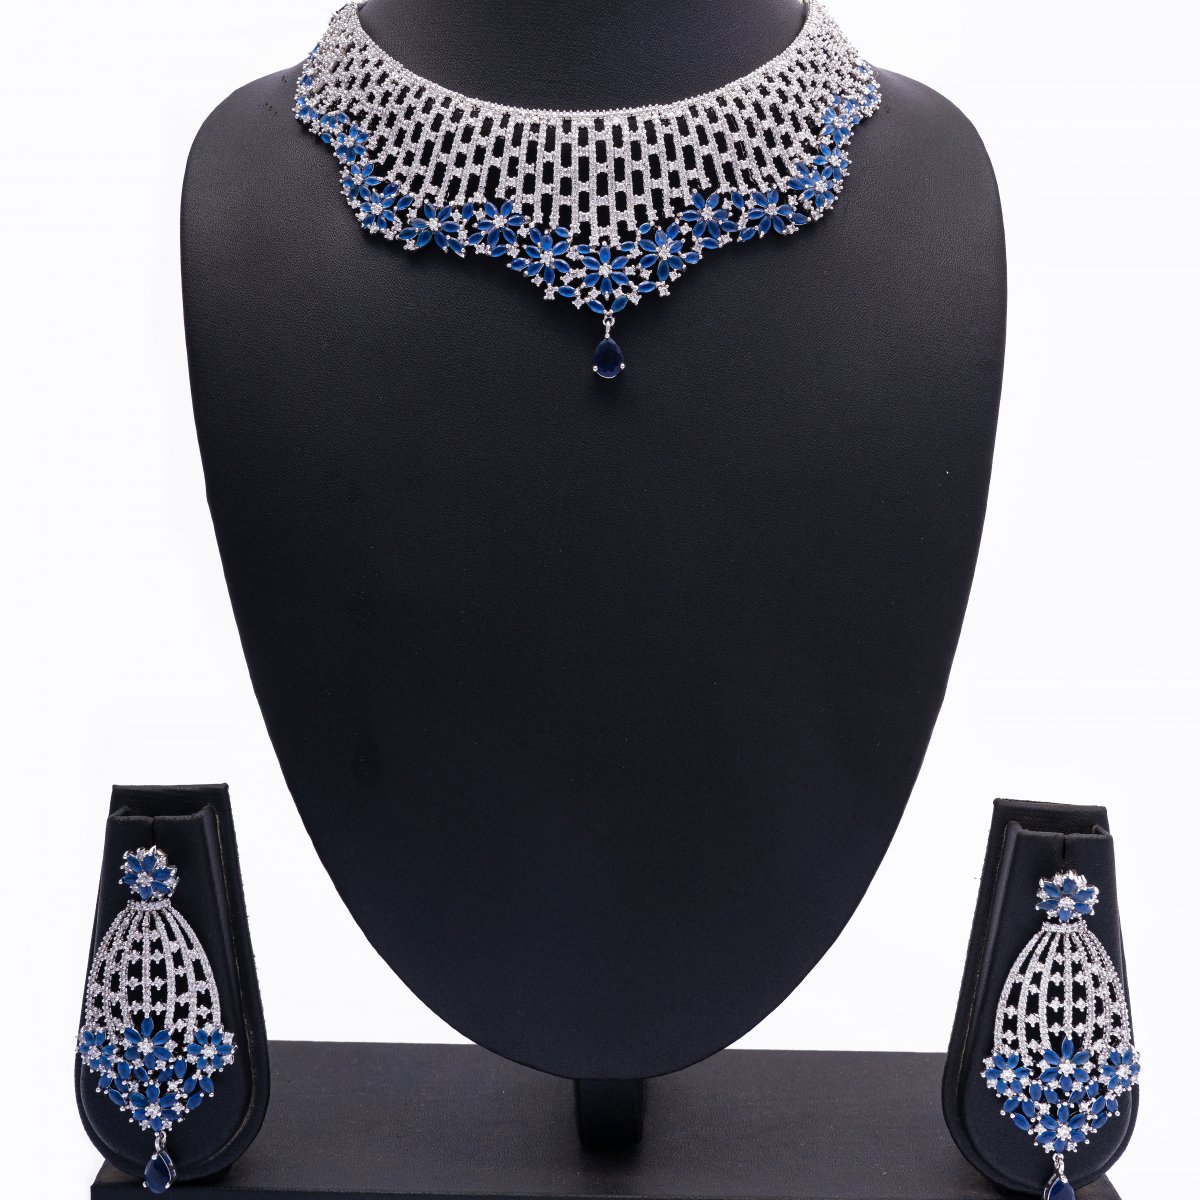 PARTY CHOKER BLUE STONE STUDDED SILVER NECKLACE WITH EARRINGS FOR WOMEN 